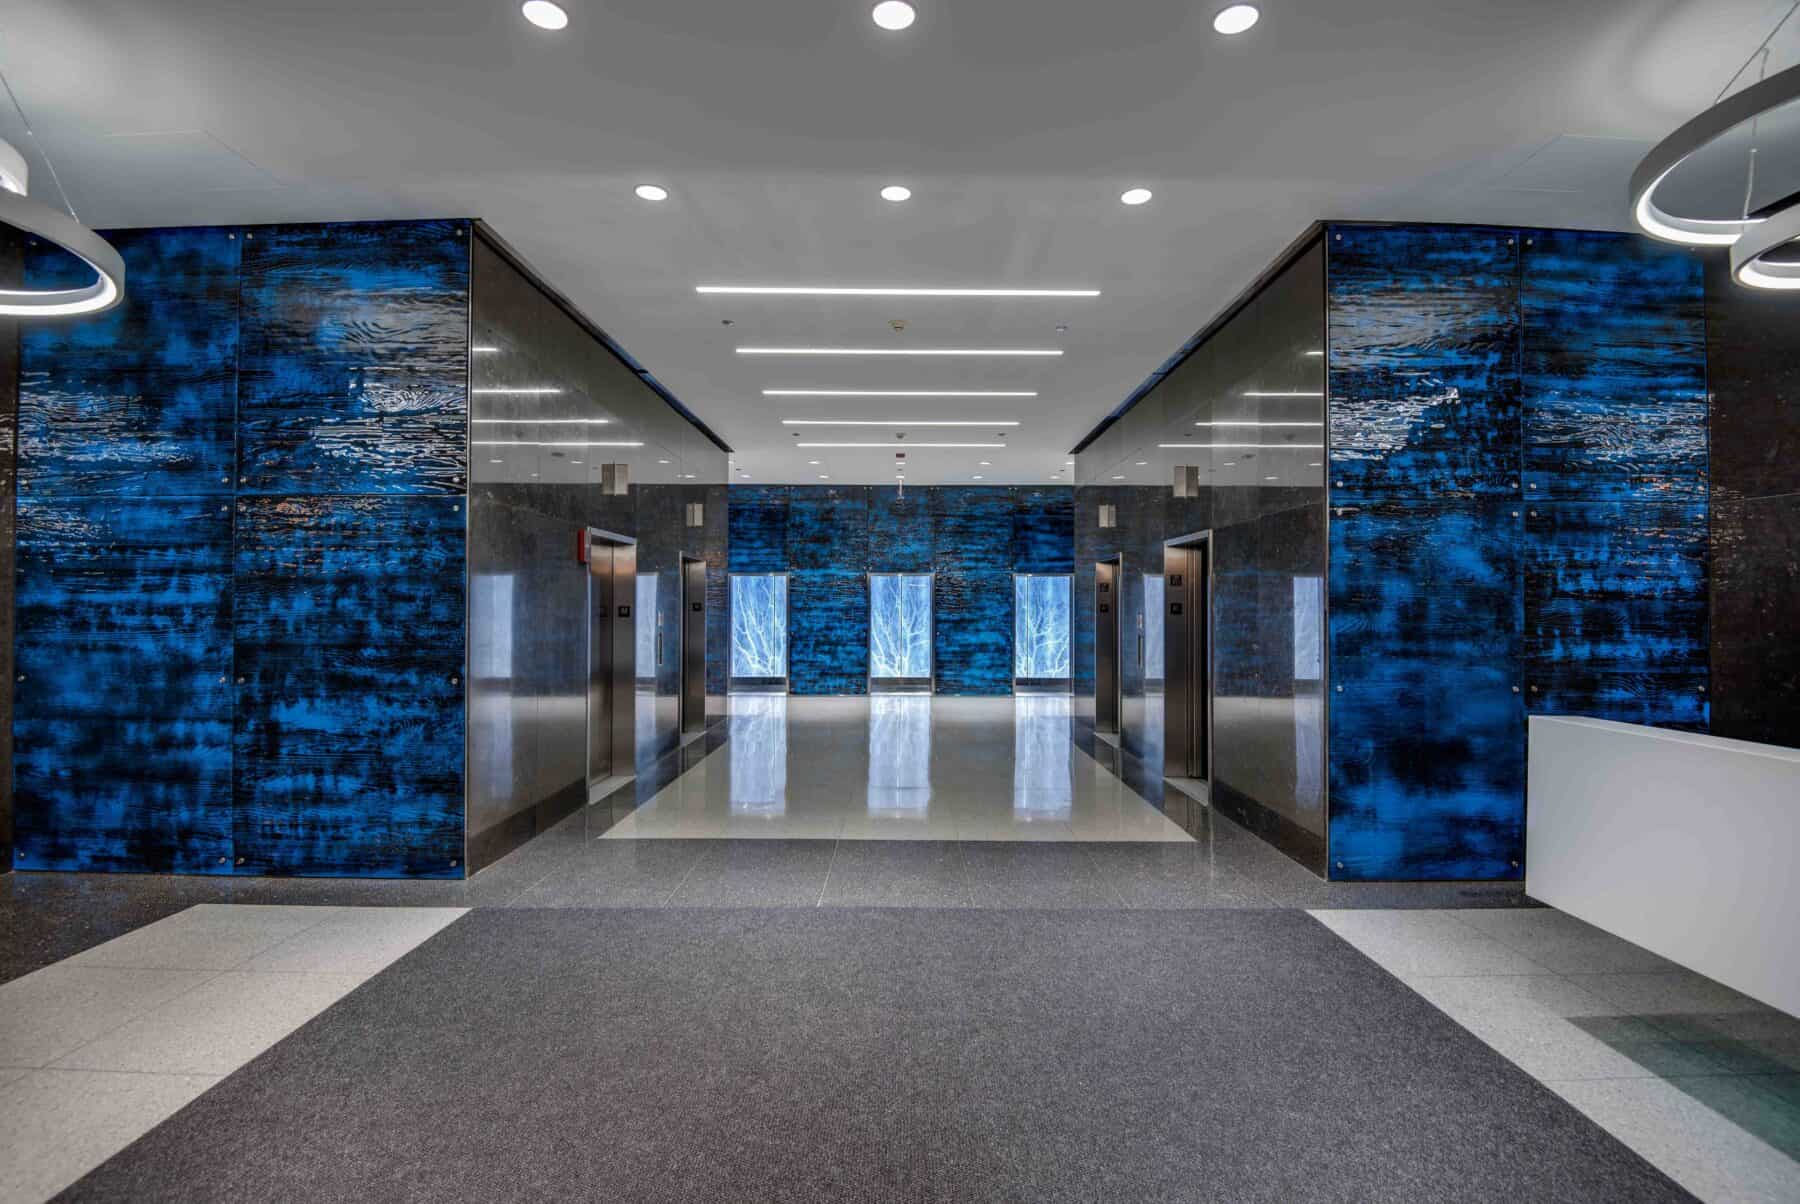 Custom Fabrication of Architectural Backlit Custom Image Glass Panels for Elevators and Textured Lobby Art Glass Panels for Construction Specialty Projects by Commercial Builder & General Contractor Structural Enterprises